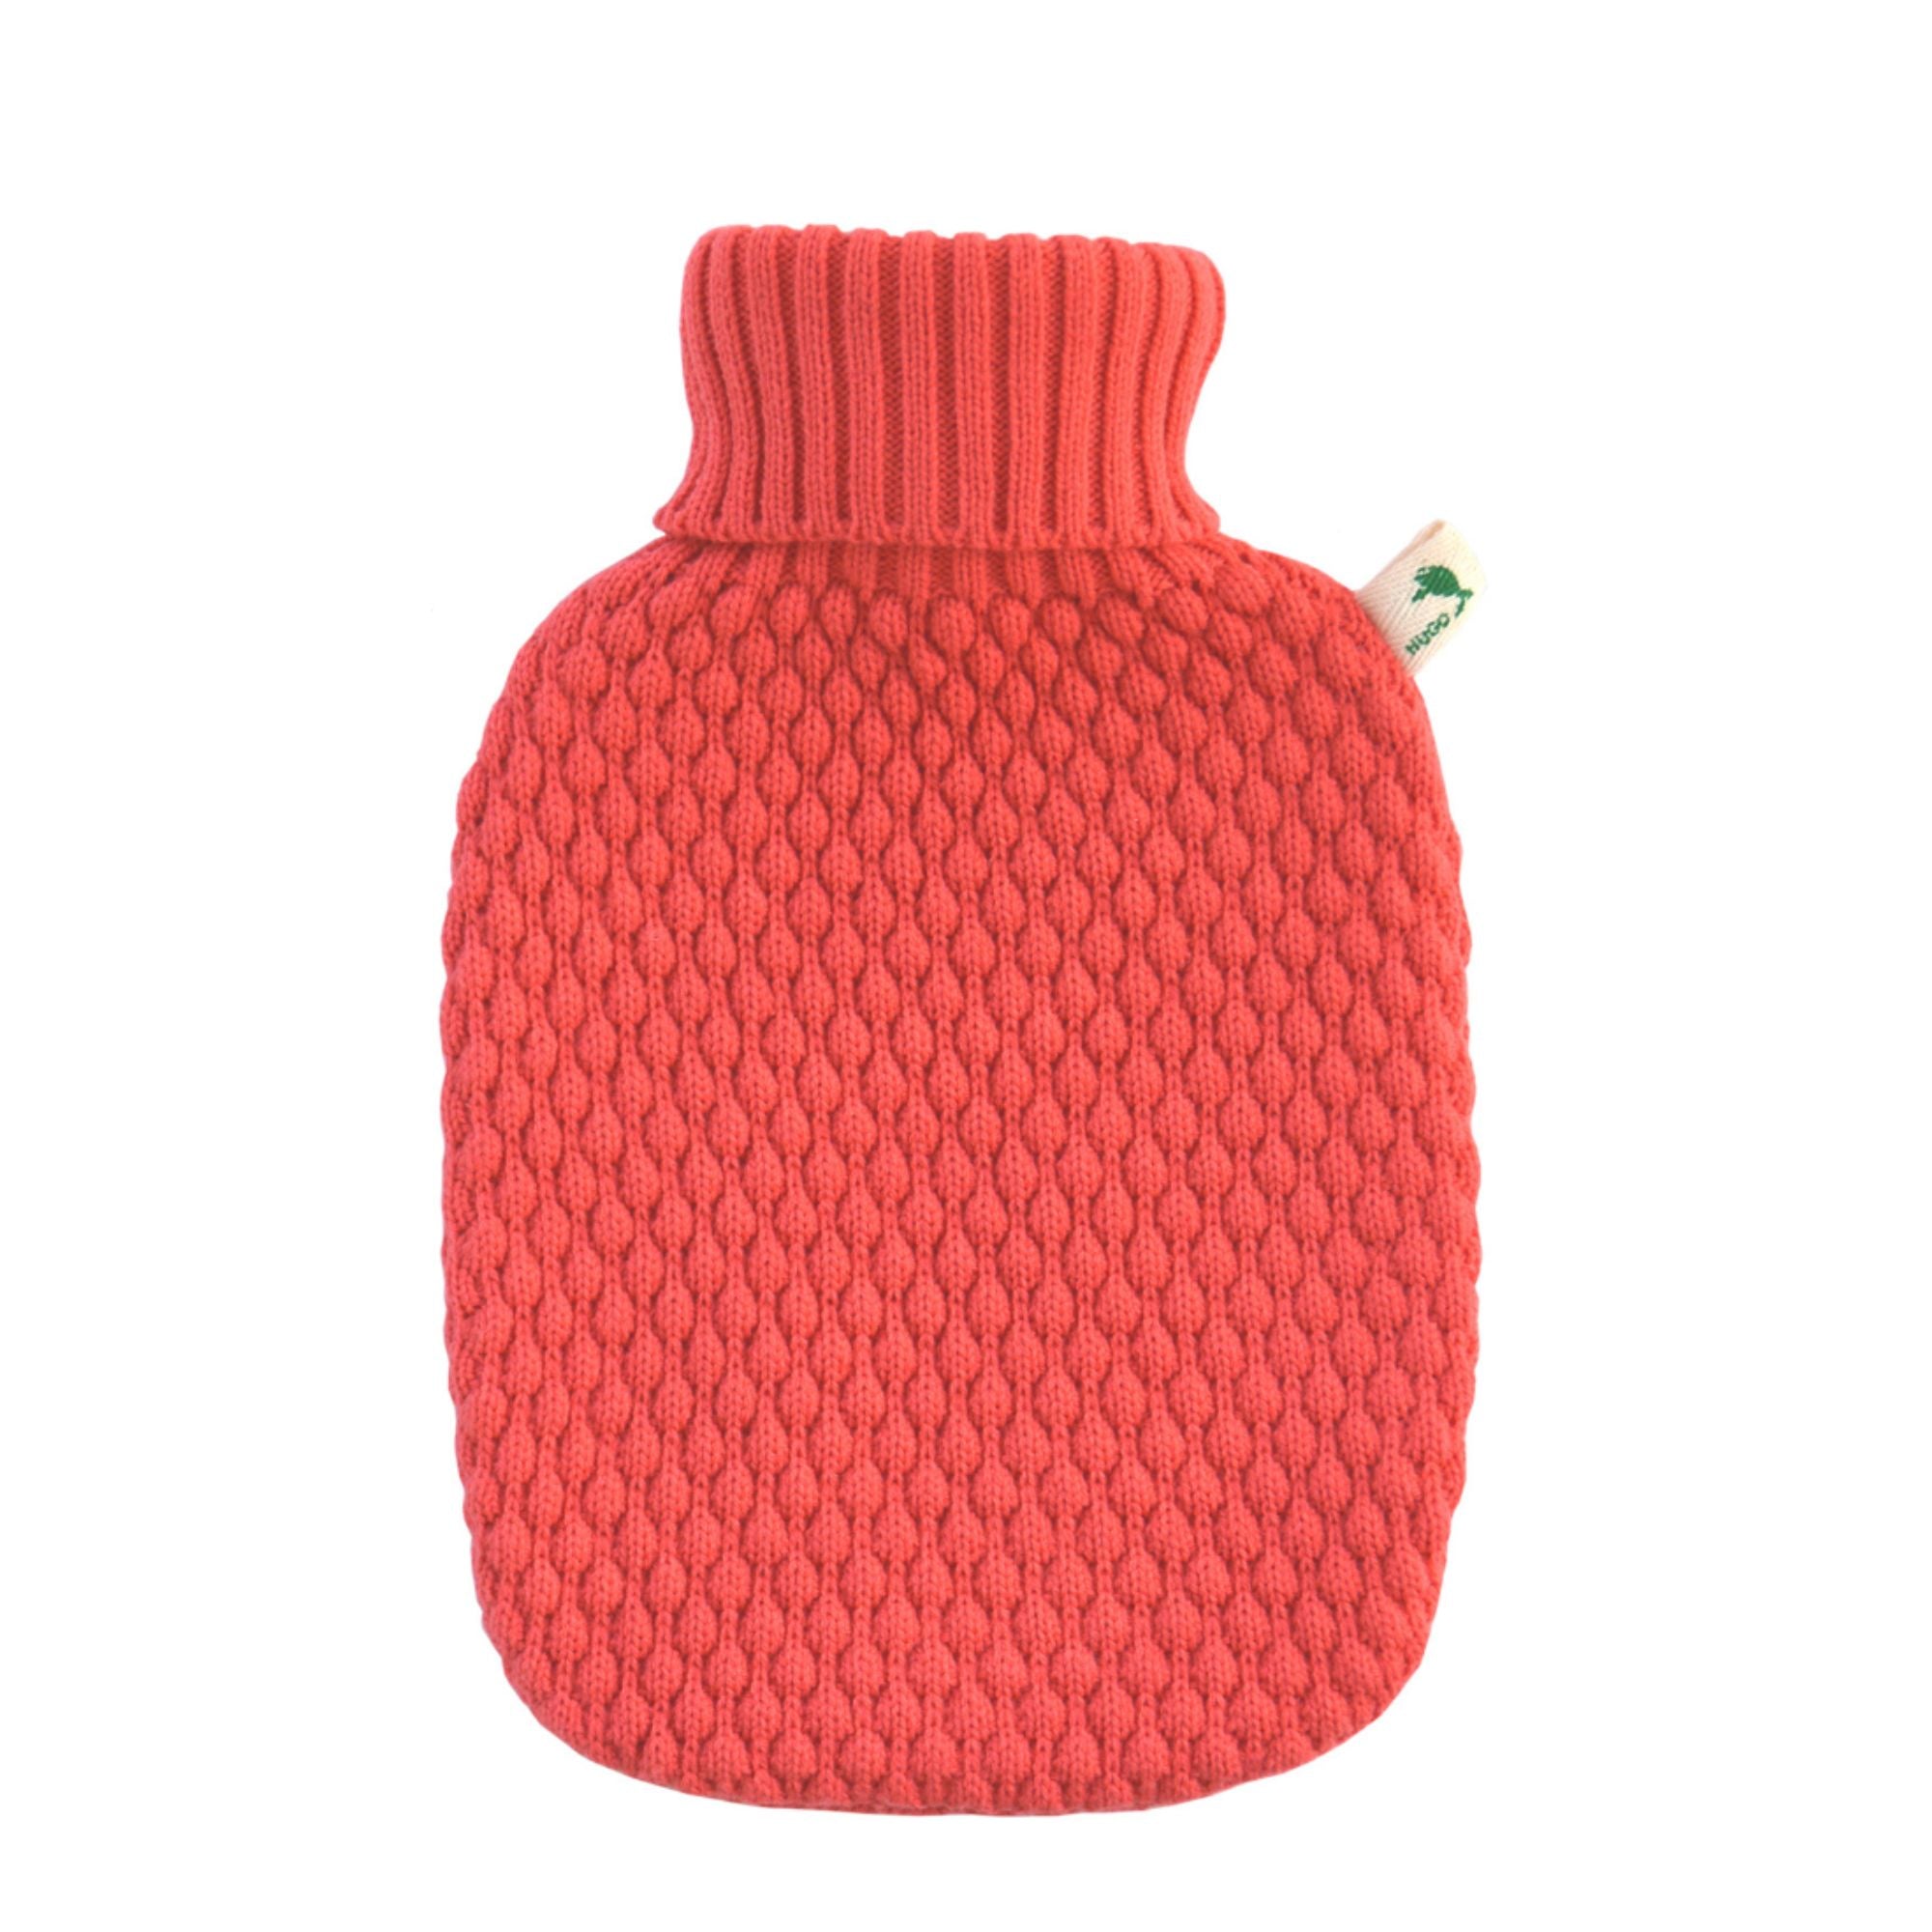 1.8 Litre Hot Water Bottle with Knitted Coral Cover (rubberless)